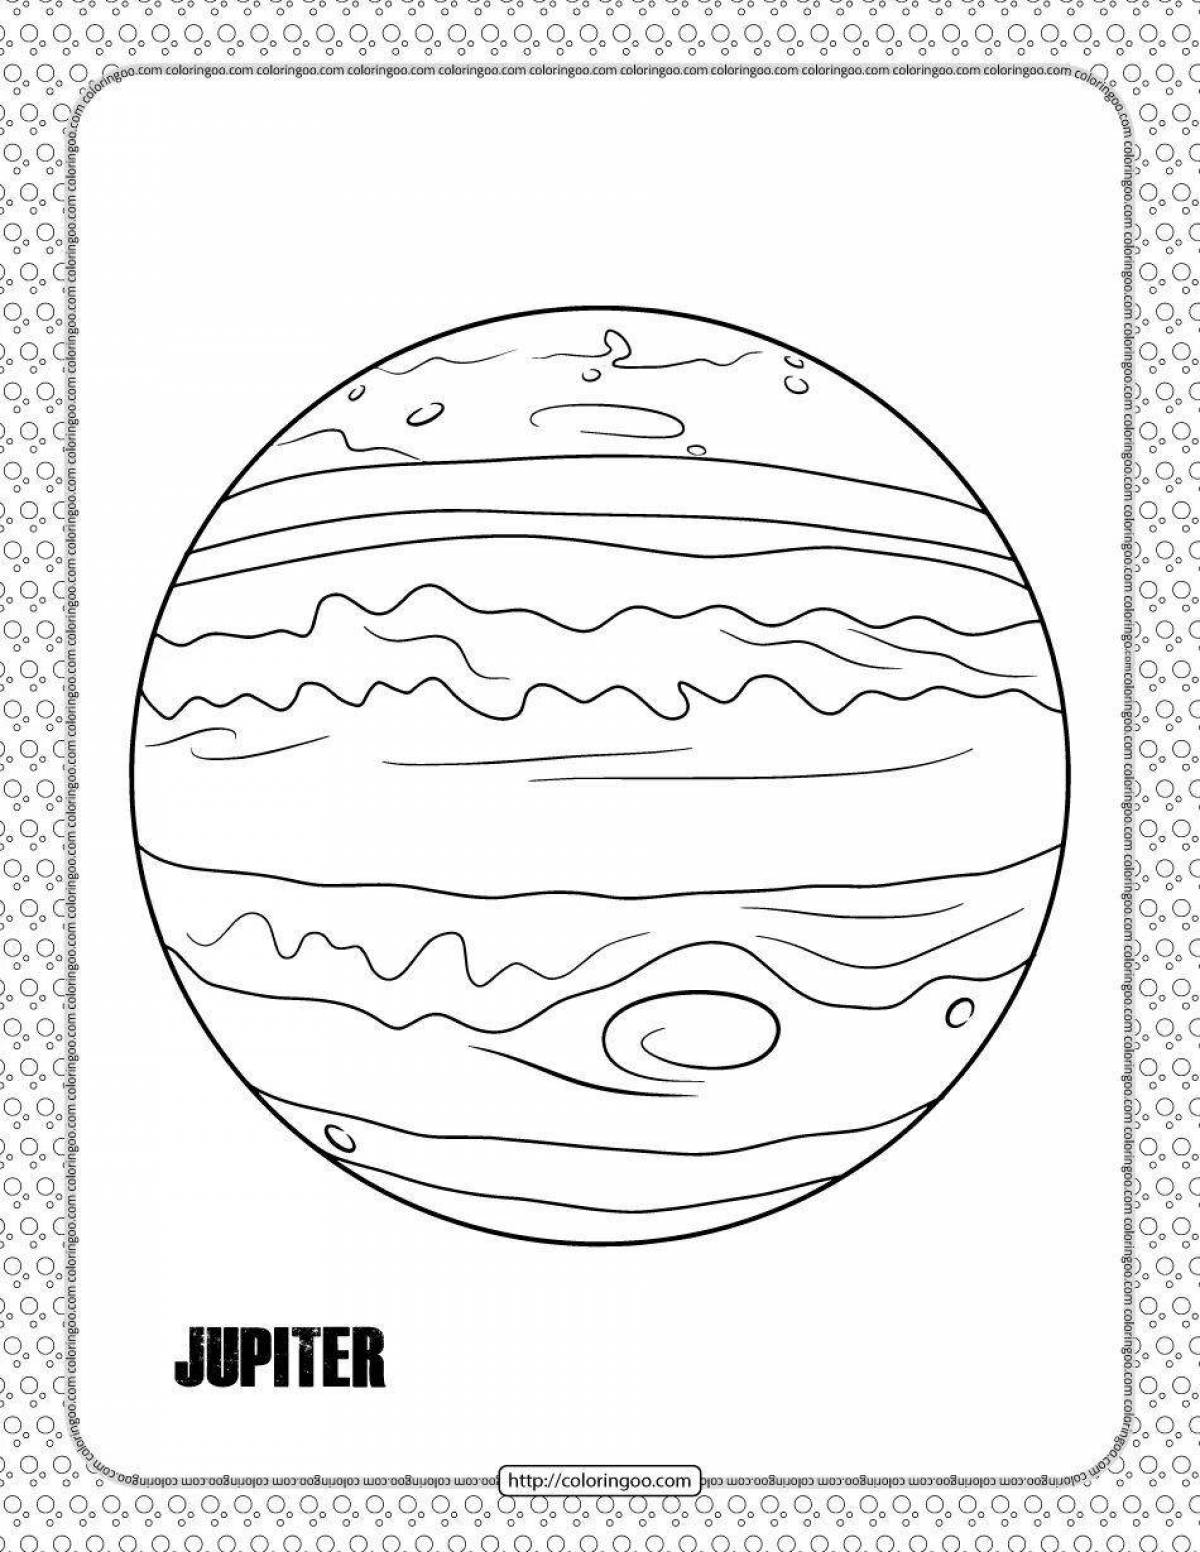 Colorfully embroidered jupiter coloring page